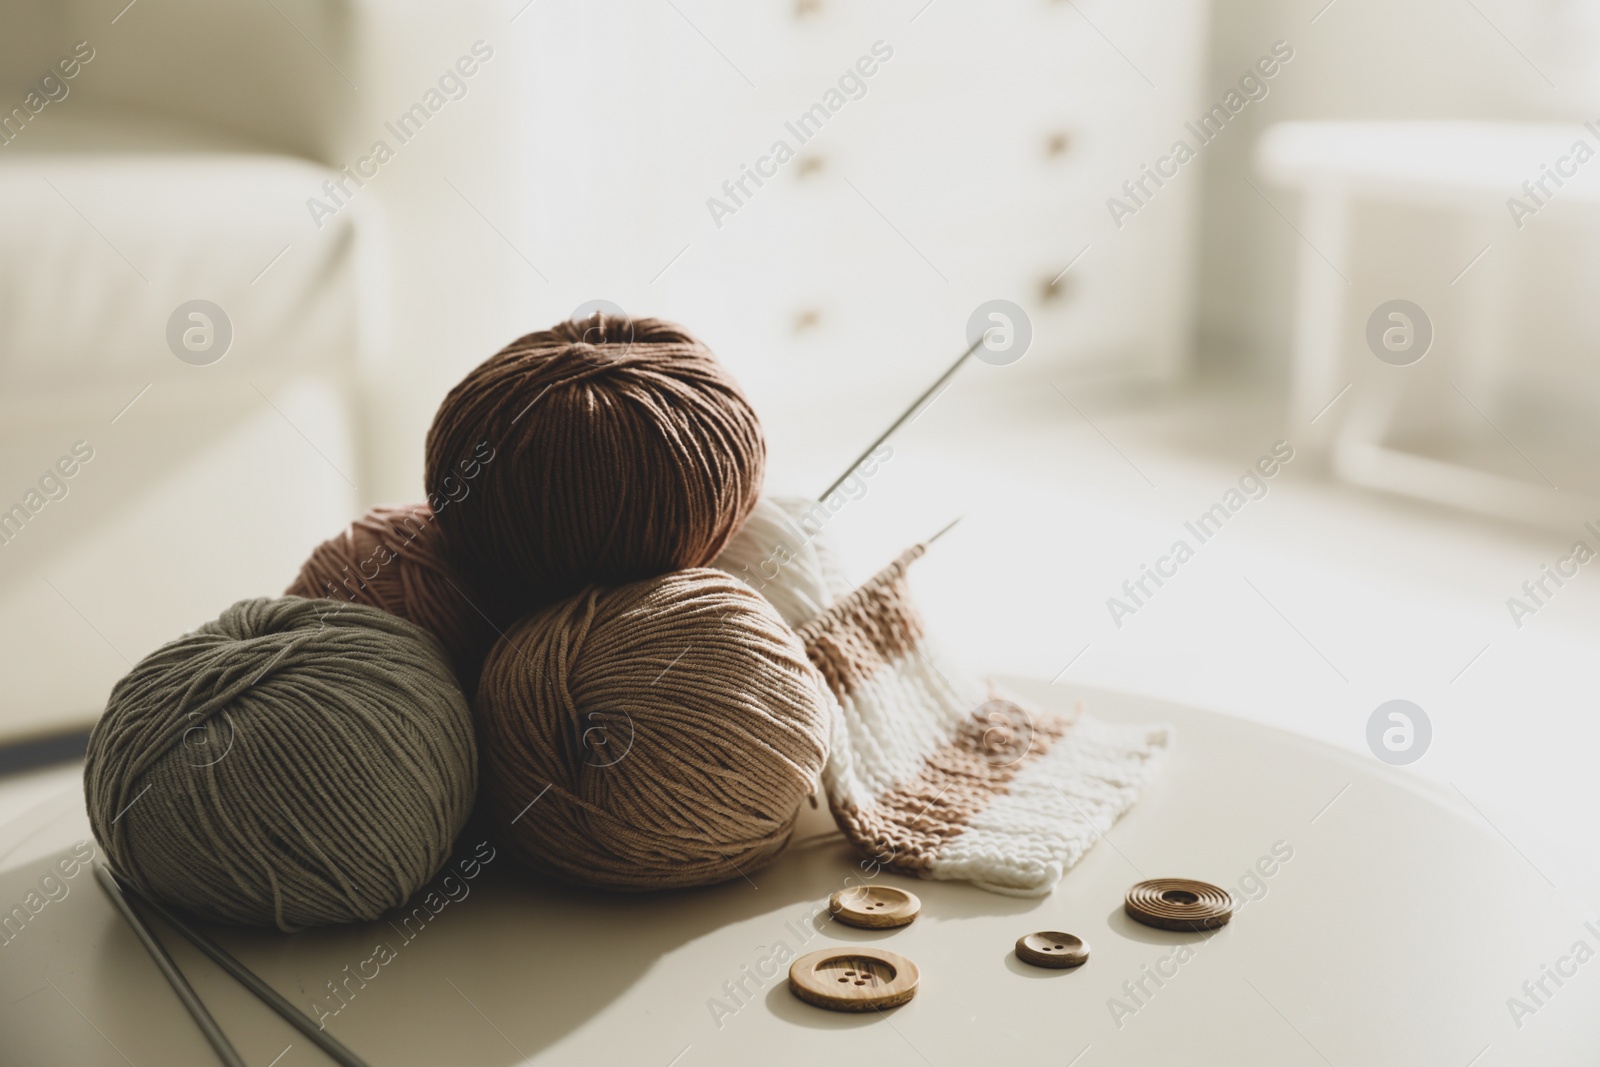 Photo of Yarn balls, buttons and knitting needles on white table indoors, space for text. Creative hobby